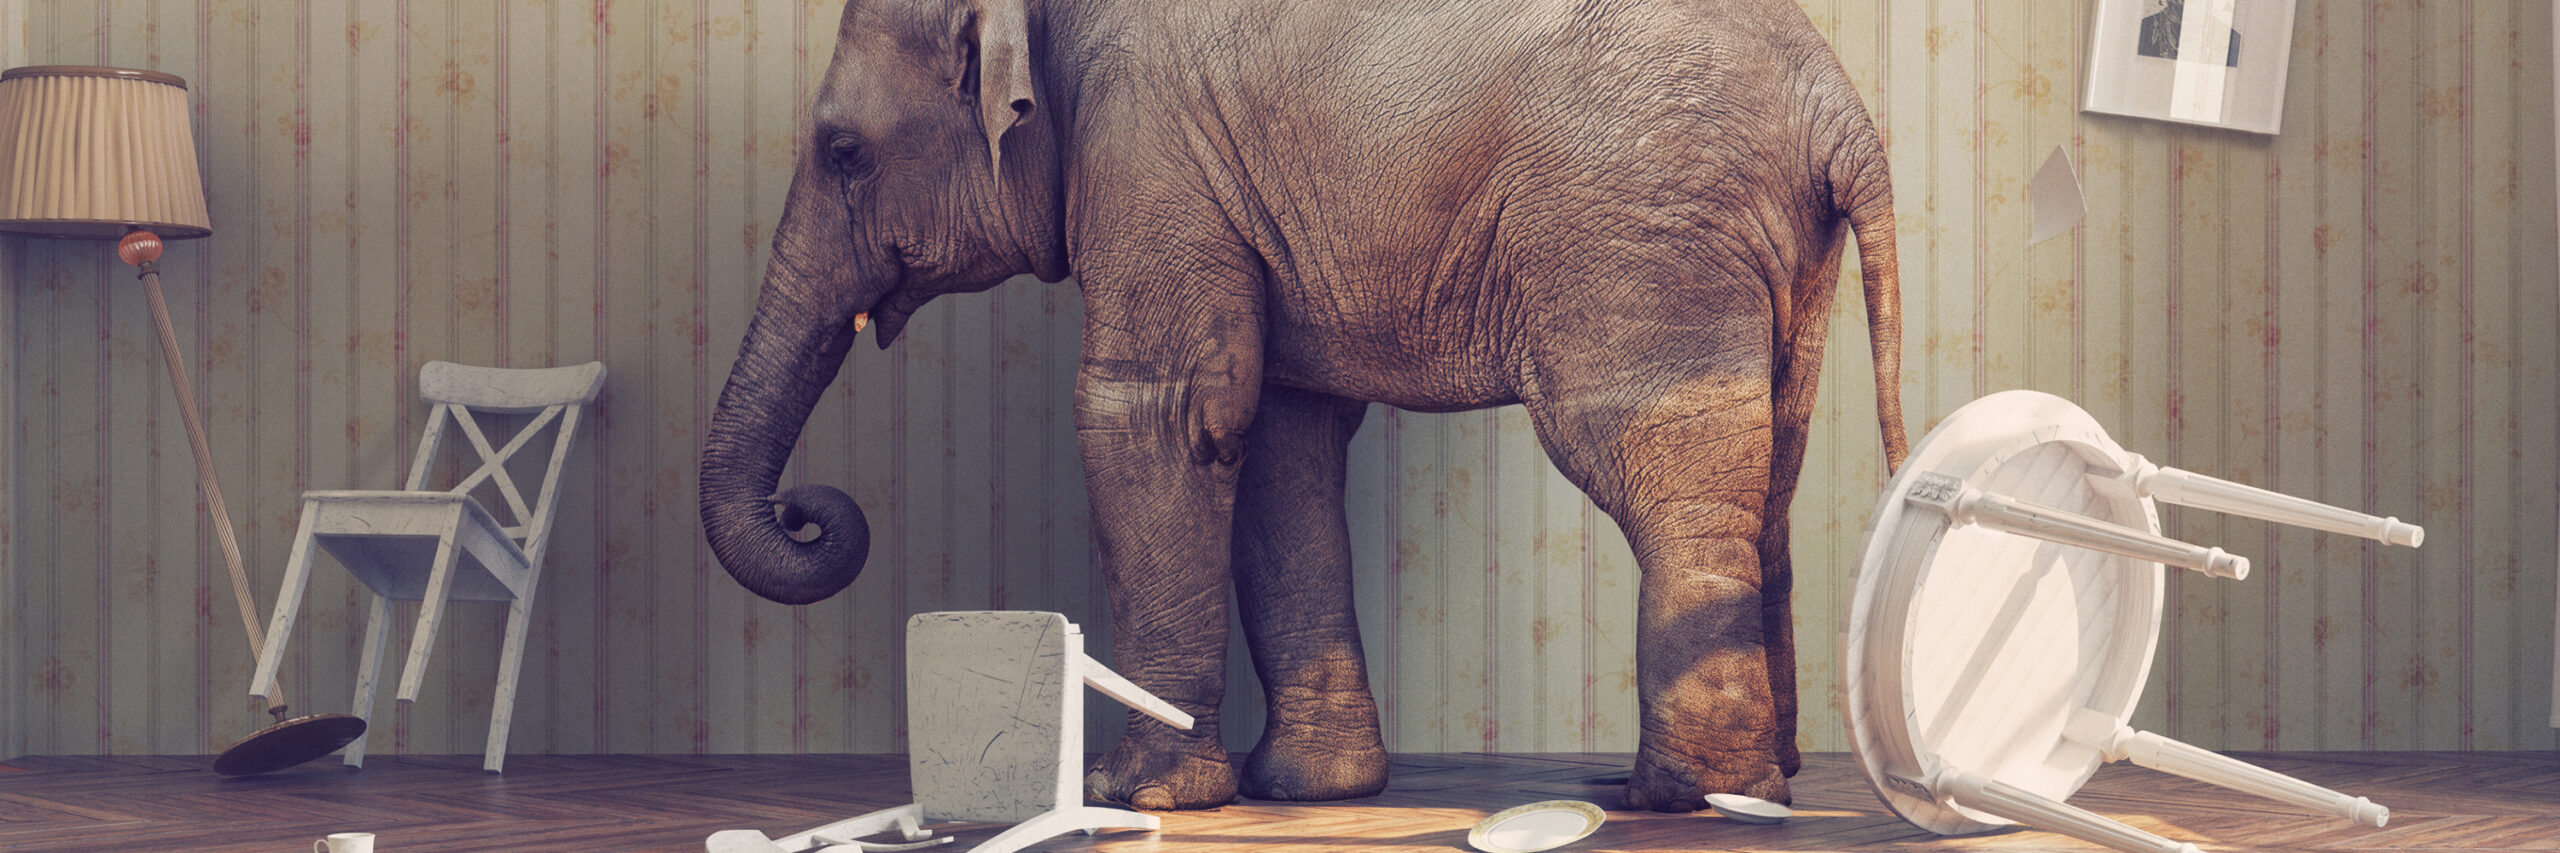 Agile Transformation and the Elephant in the Room